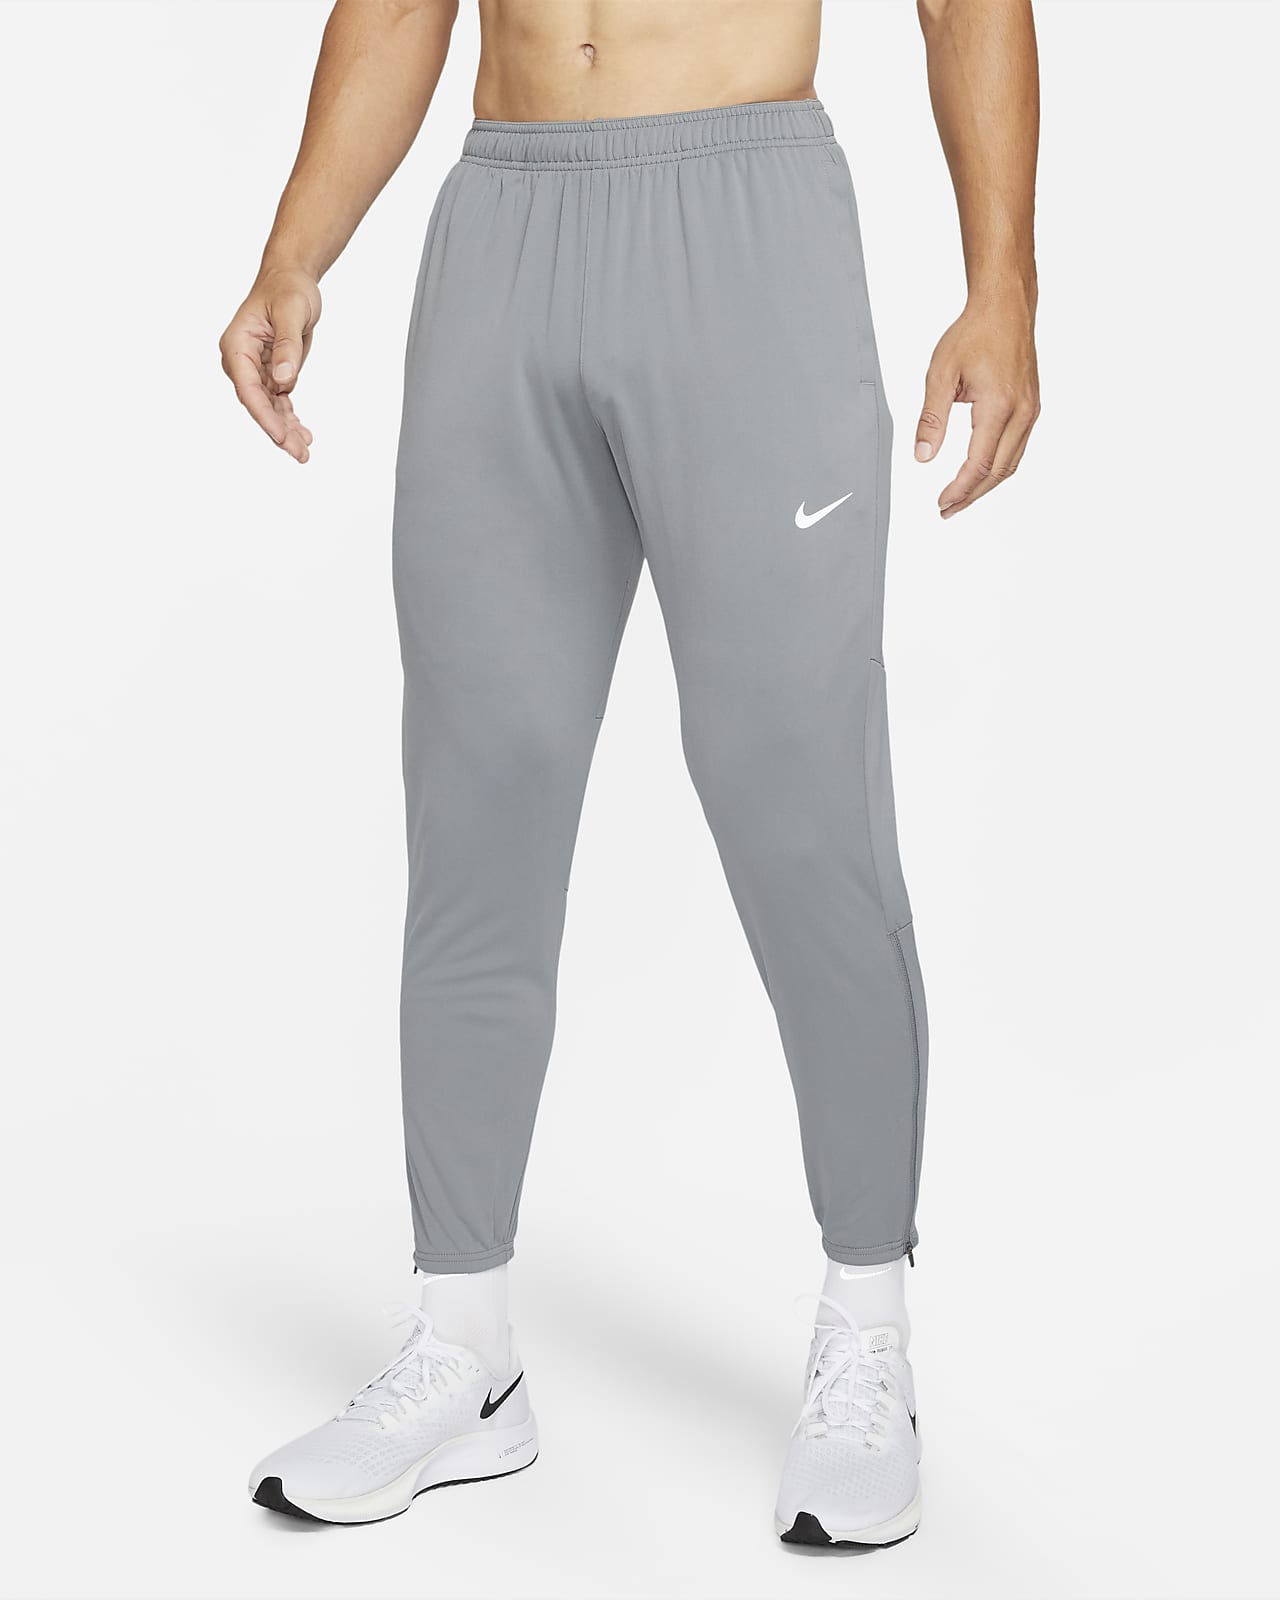 https://static.nike.com/a/images/t_PDP_1280_v1/f_auto,q_auto:eco/a8894baf-e2de-43ad-a02e-79df2263d817/dri-fit-challenger-knit-running-trousers-BH2j1q.png